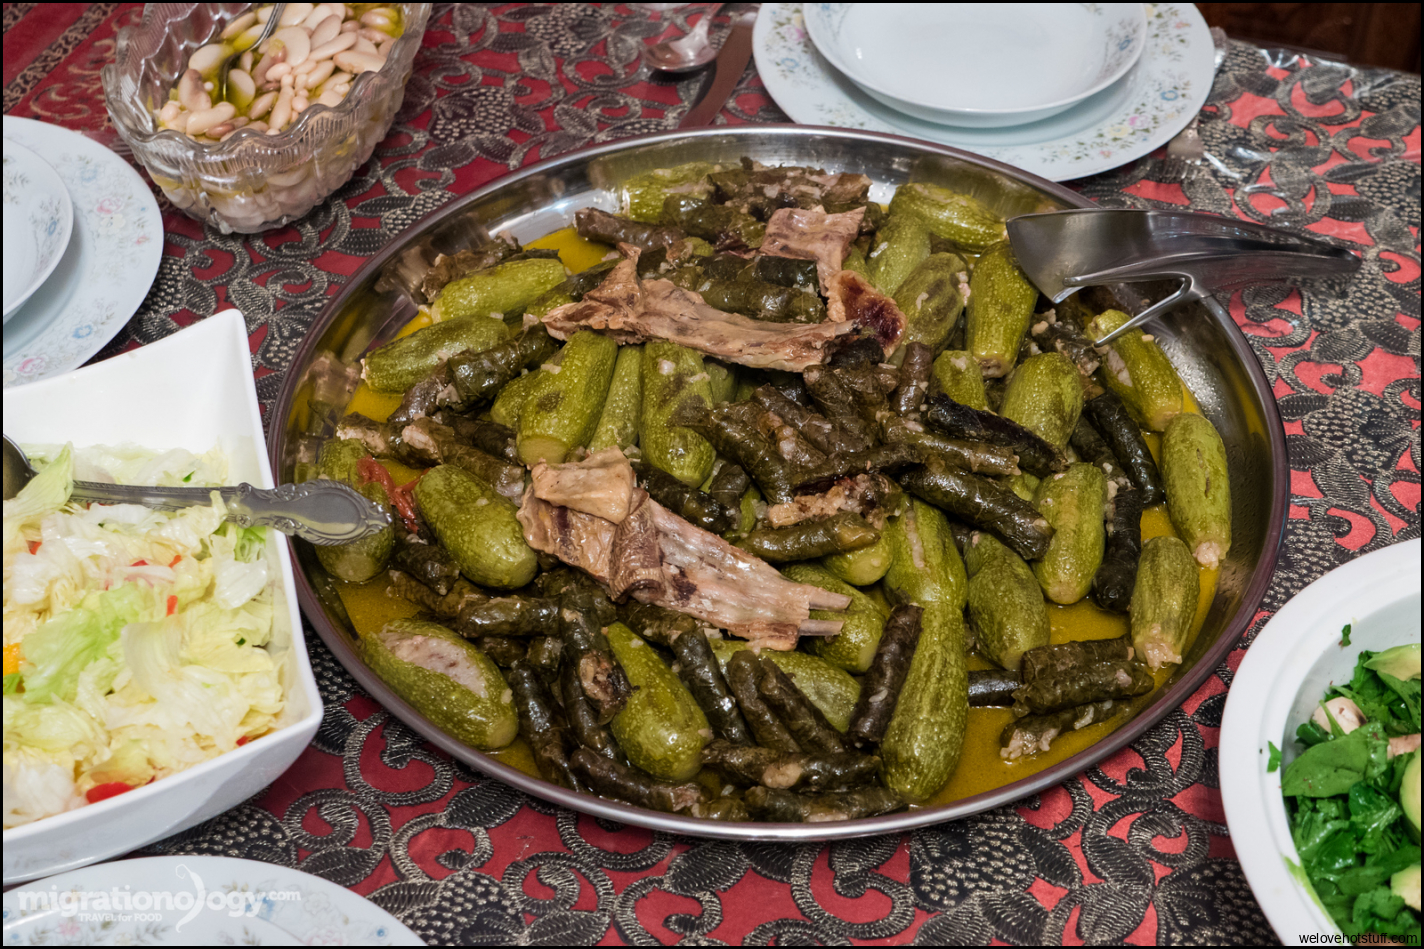 Jordanian Food: 25 of the Best Dishes You Should Eat